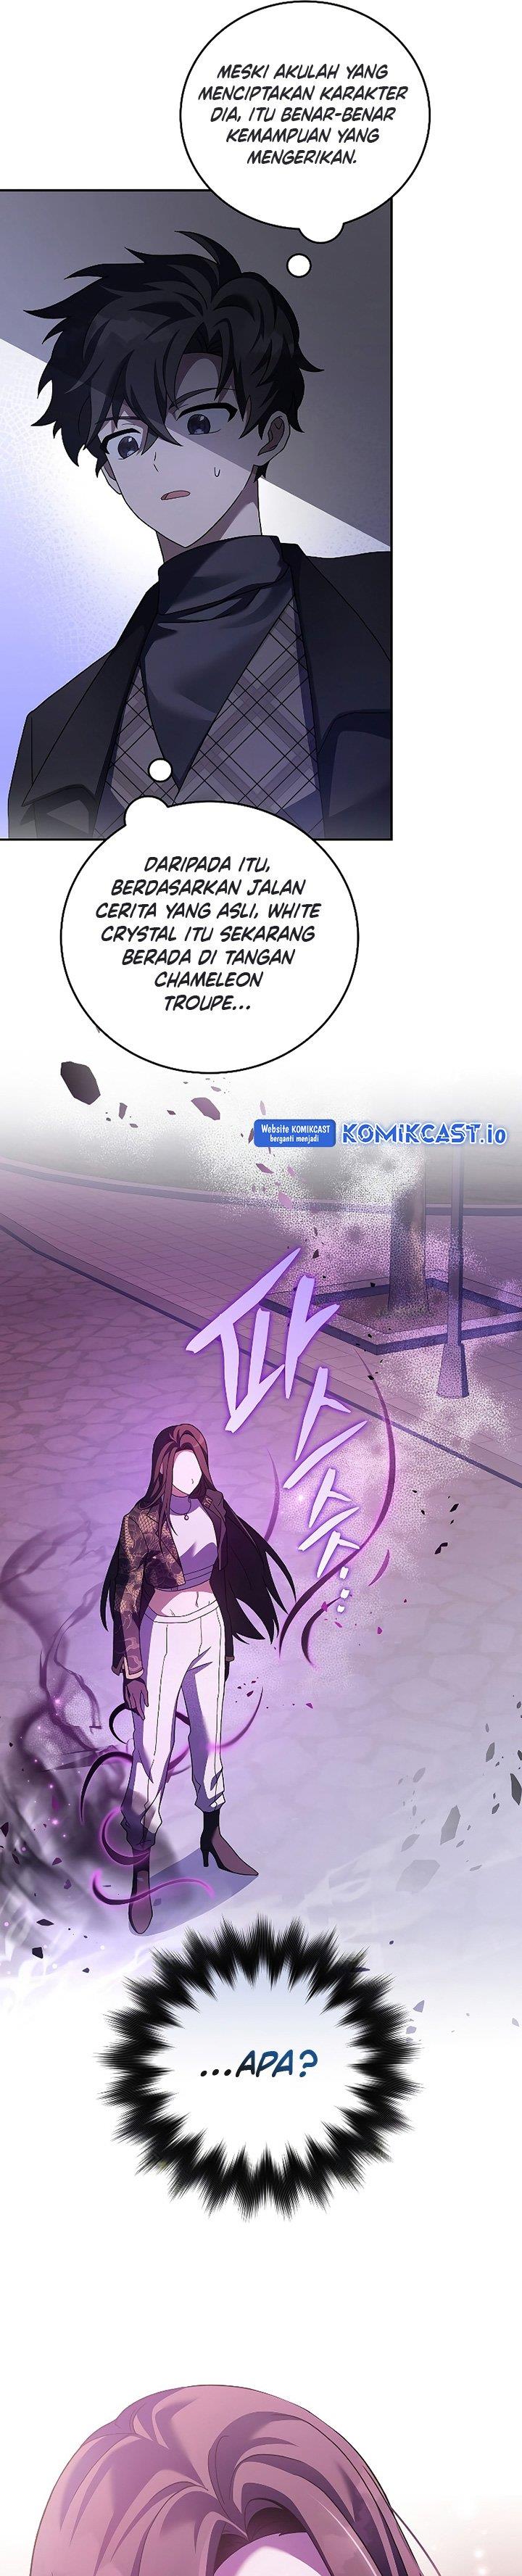 The Novel’s Extra Chapter 67